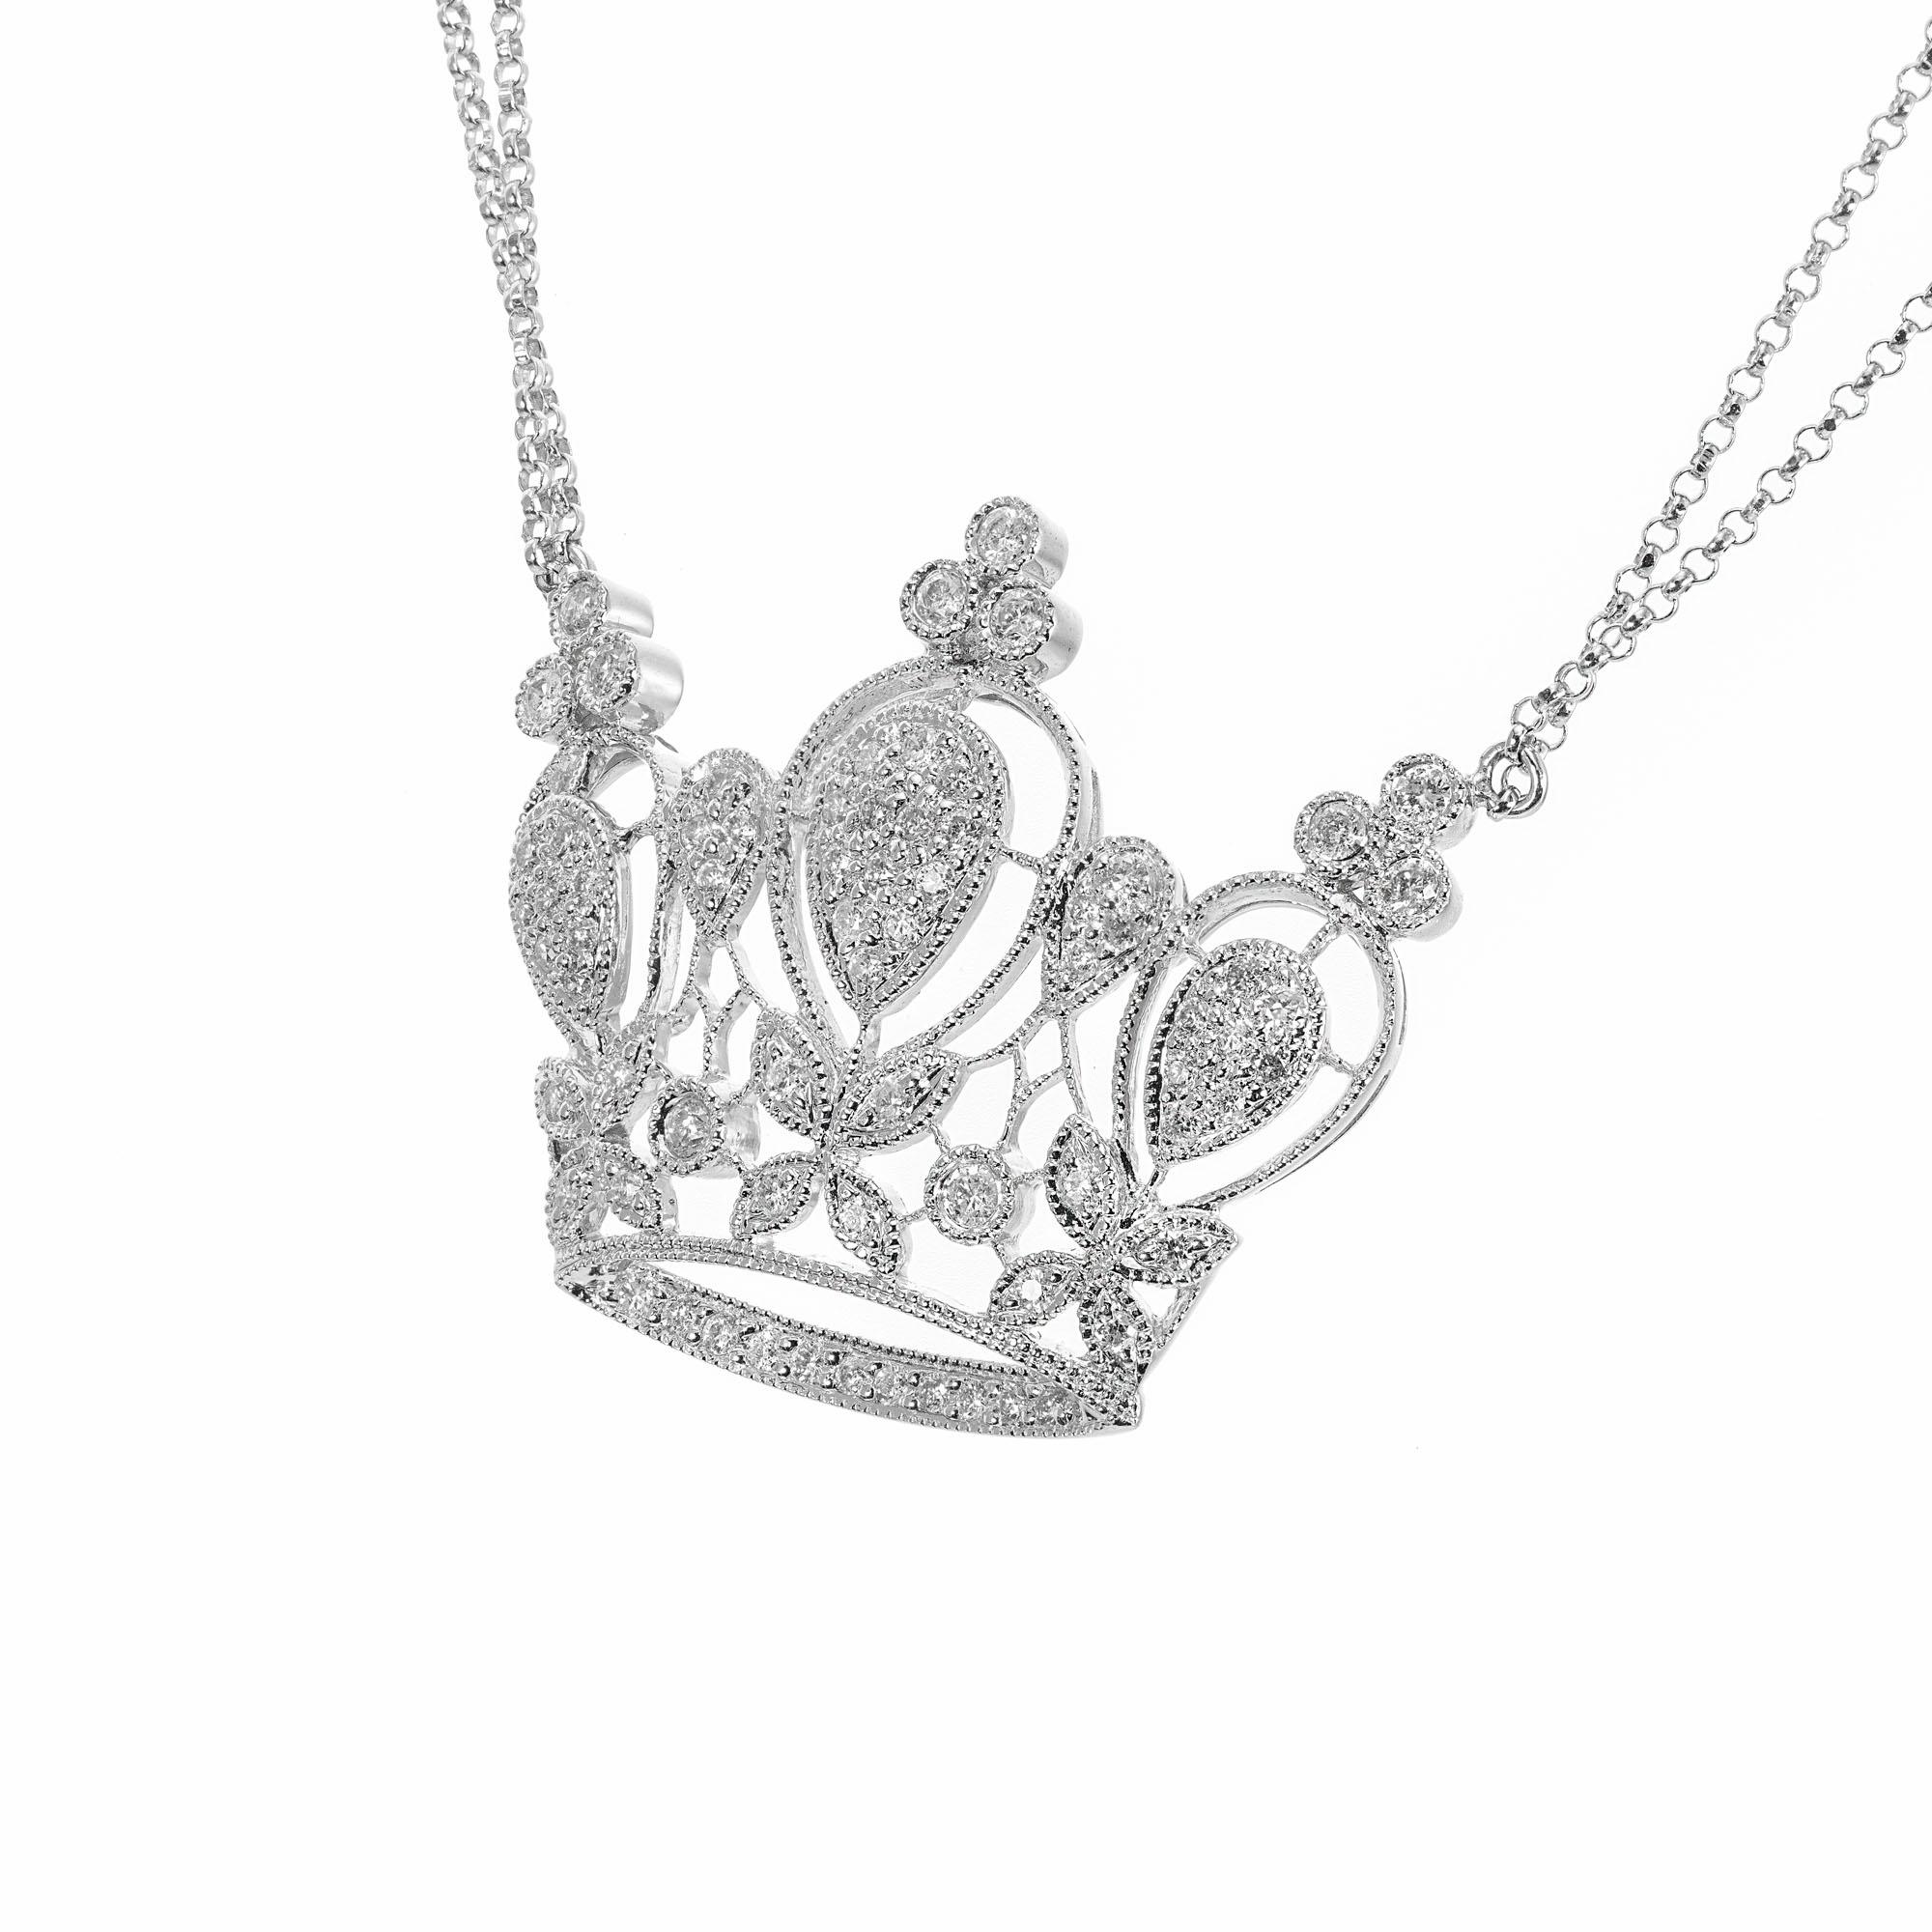 Diamond crown pendant necklace. 71 round full cut diamonds set in a 18k white gold open work crown style pendant with double chain necklace. 16 inches in length. 

71 round diamonds, H-I SI-I approx. .80cts
18k white gold 
Stamped: 750 18k
9.4